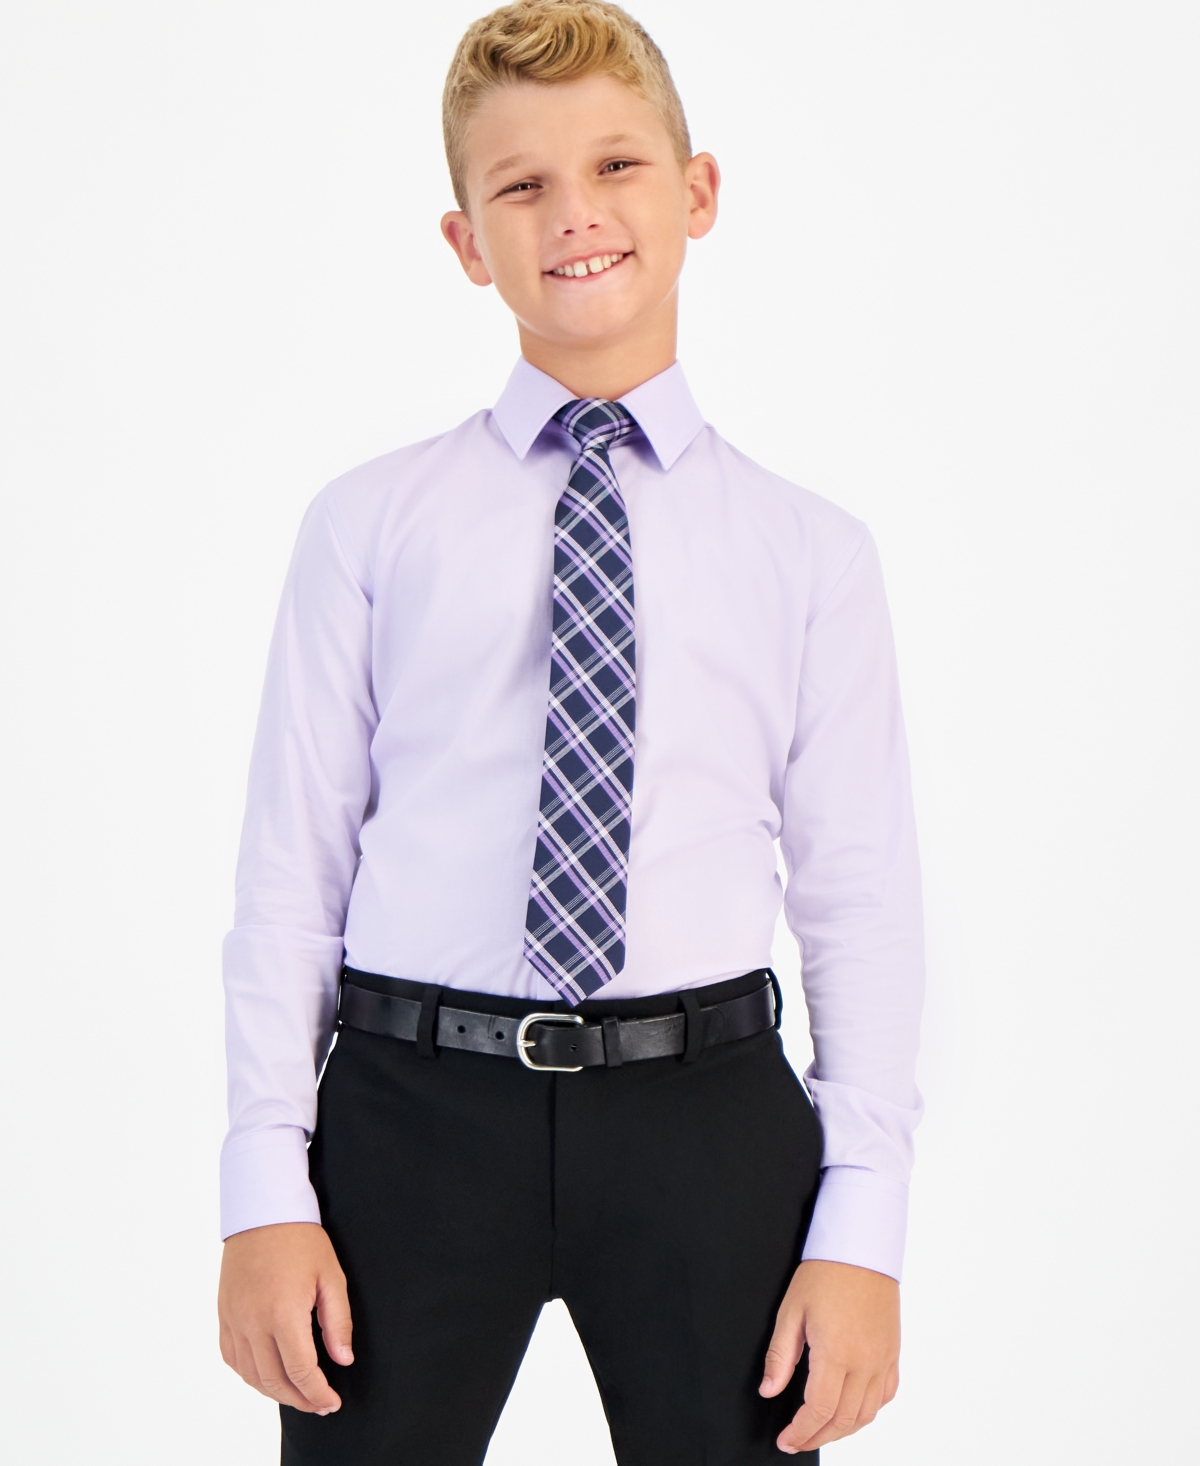 Kenneth Cole Reaction Kids' Big Boys Classic Fit Dress Shirt In Navy,lavender